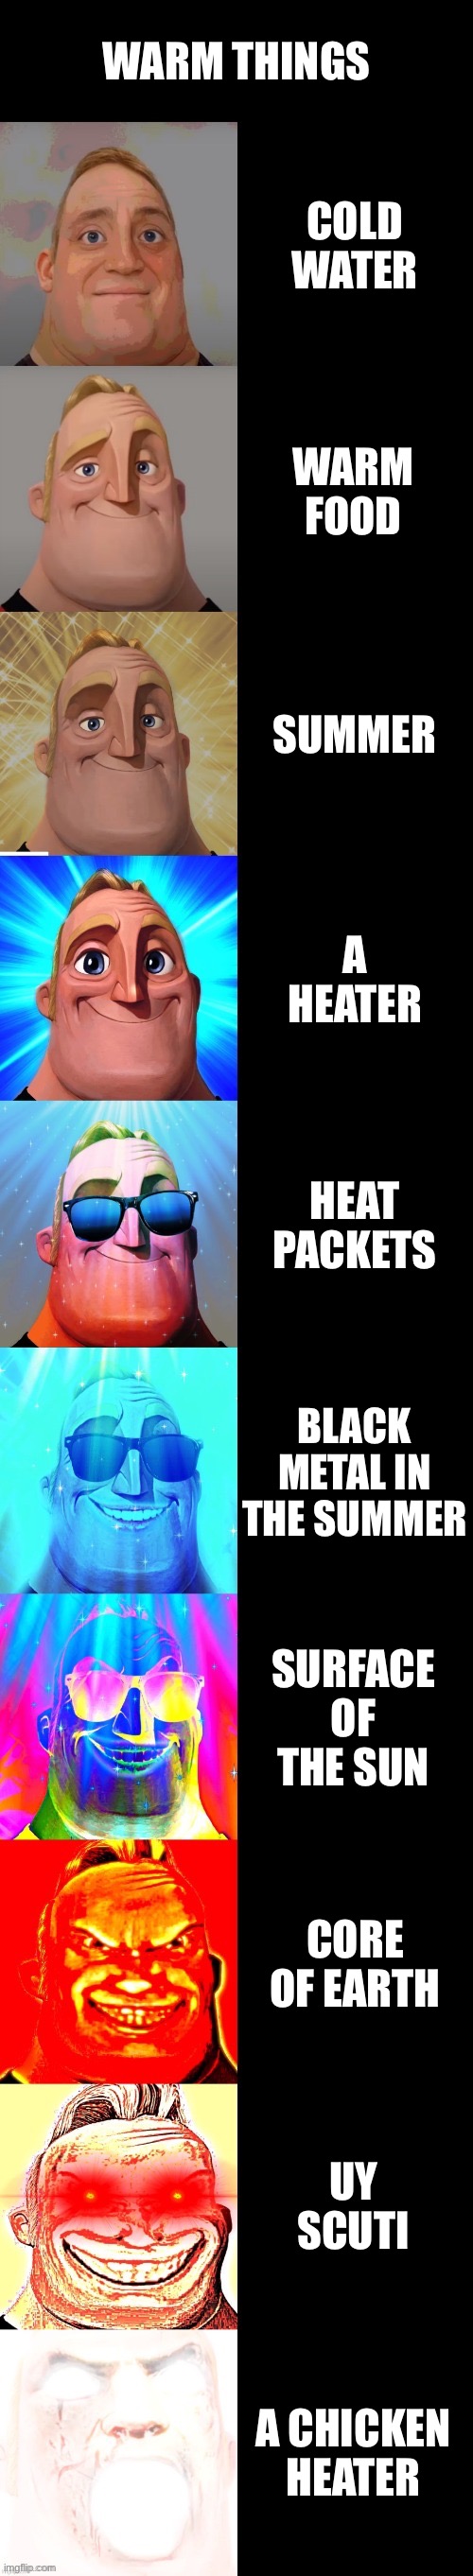 mr incredible becoming canny | WARM THINGS; COLD WATER; WARM FOOD; SUMMER; A HEATER; HEAT PACKETS; BLACK METAL IN THE SUMMER; SURFACE OF THE SUN; CORE OF EARTH; UY SCUTI; A CHICKEN HEATER | image tagged in mr incredible becoming canny | made w/ Imgflip meme maker